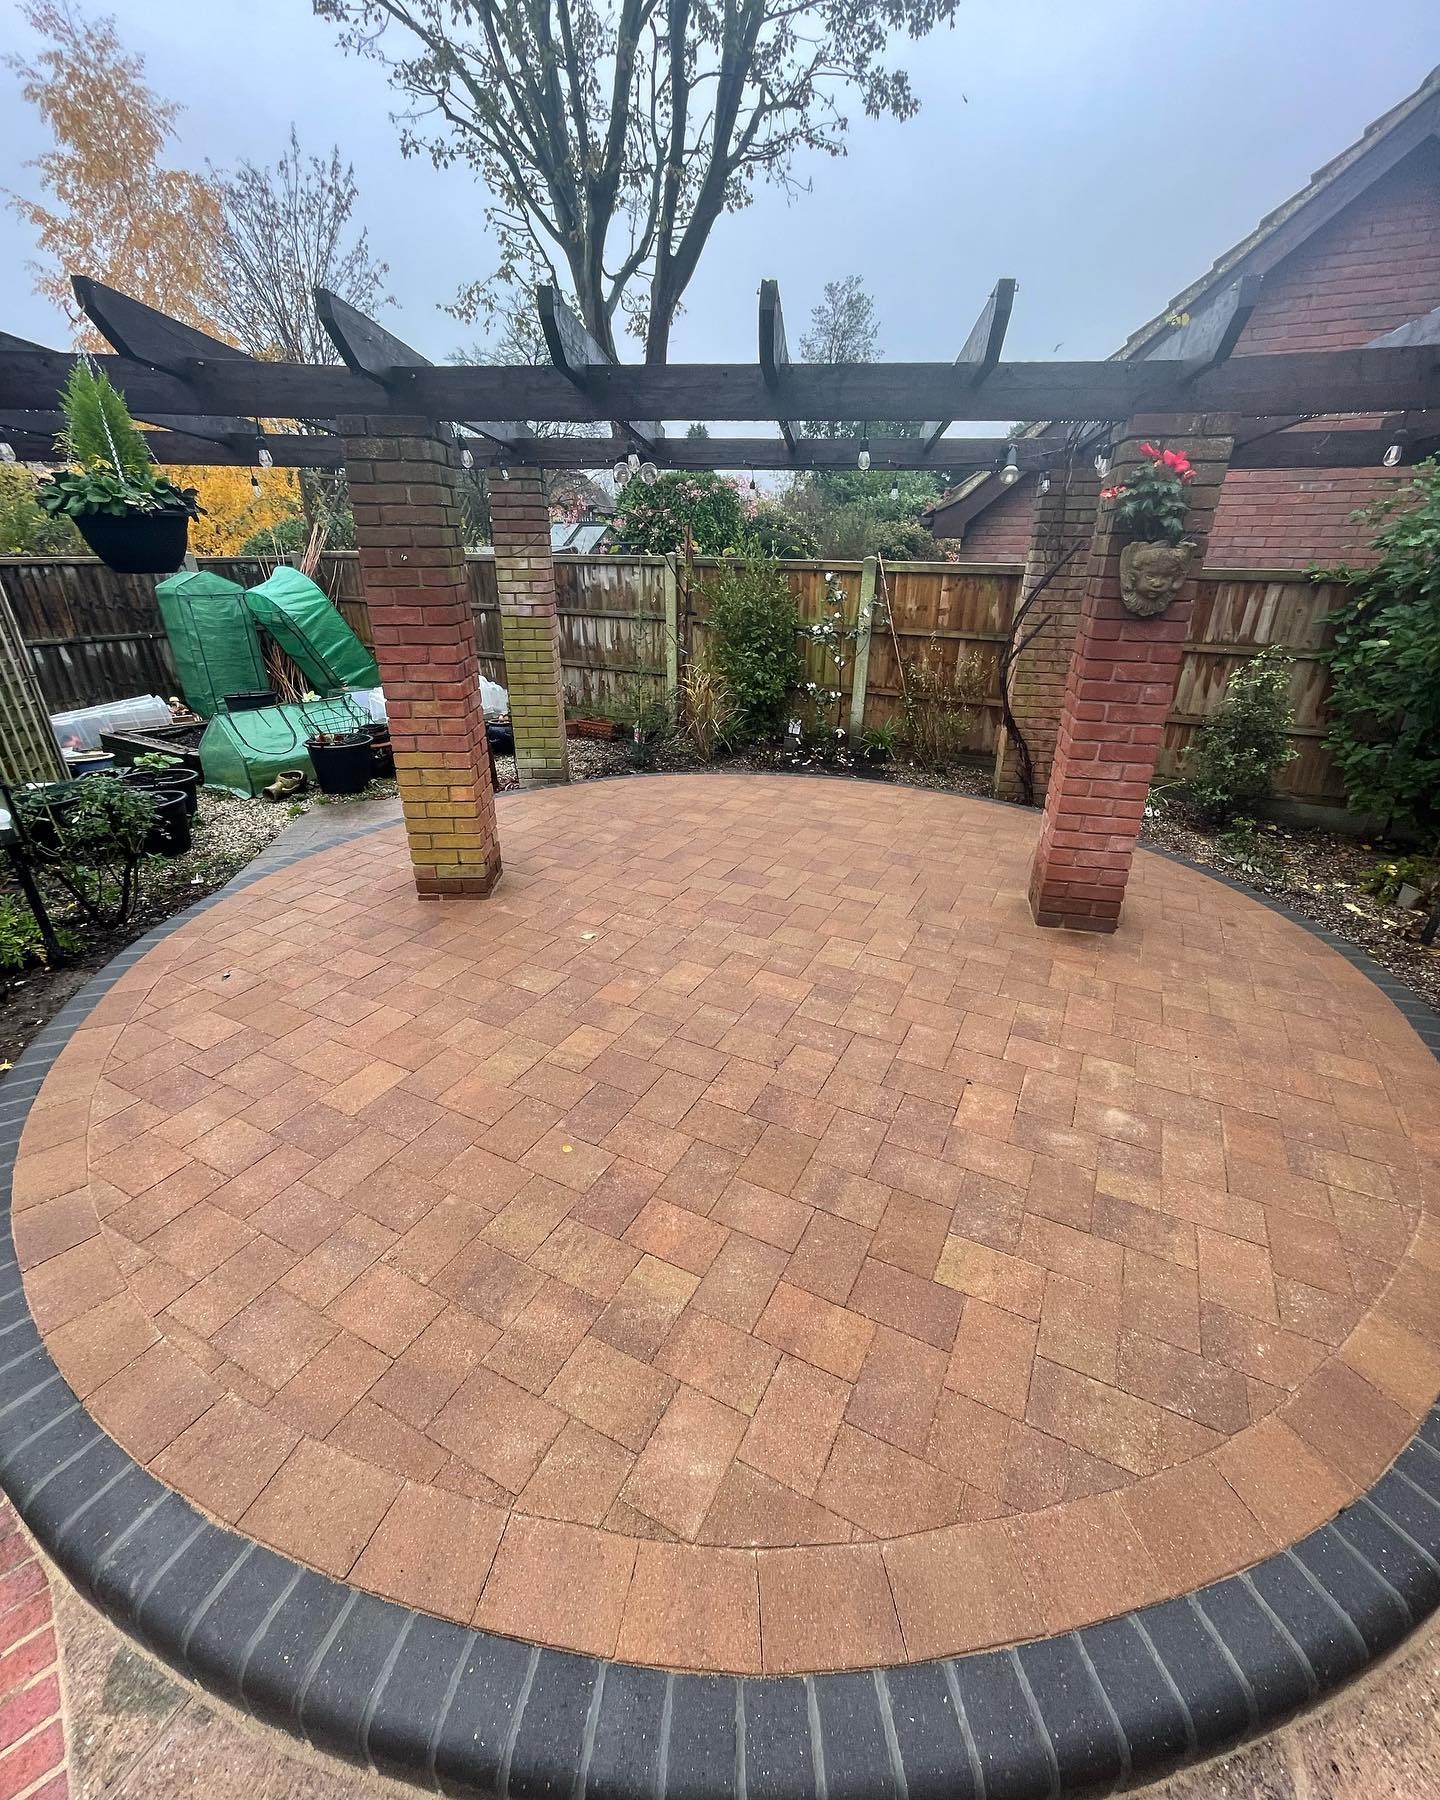 How to Keep Your Block Paving Sparkling Clean?